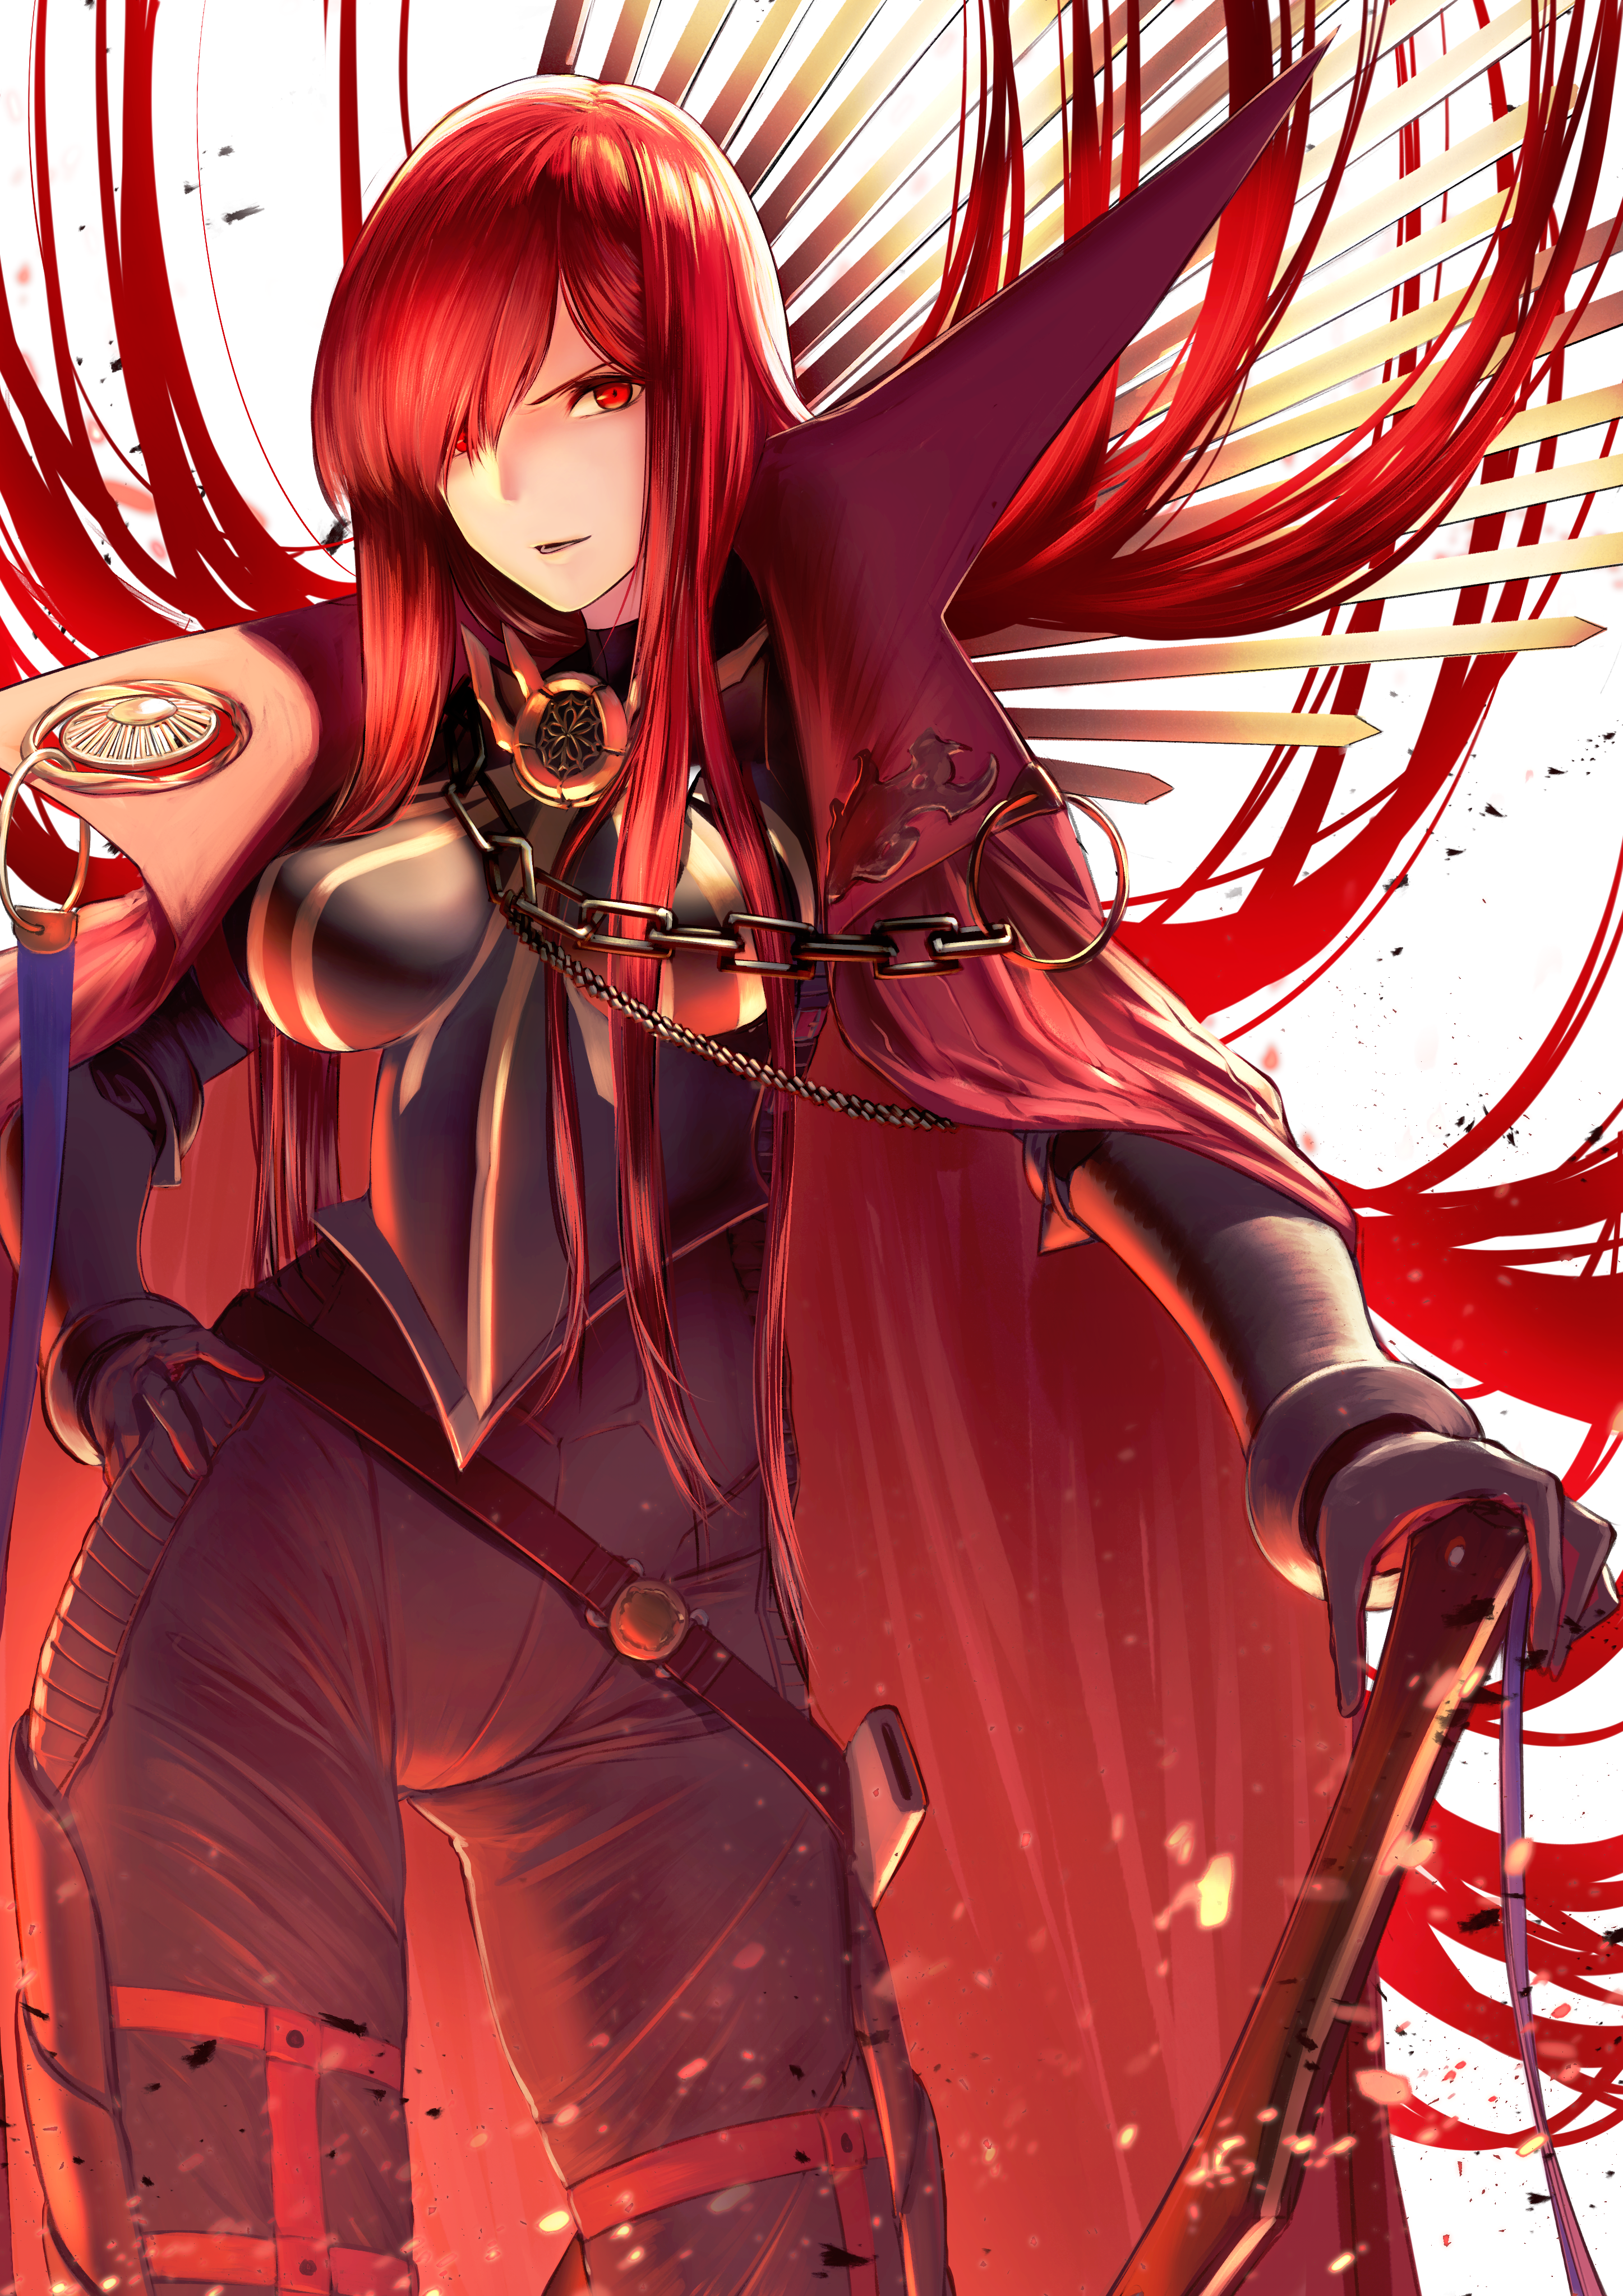 Anime 2894x4093 anime girls anime digital art artwork portrait display long hair Fate/Grand Order redhead sword women with swords simple background red eyes open mouth gloves